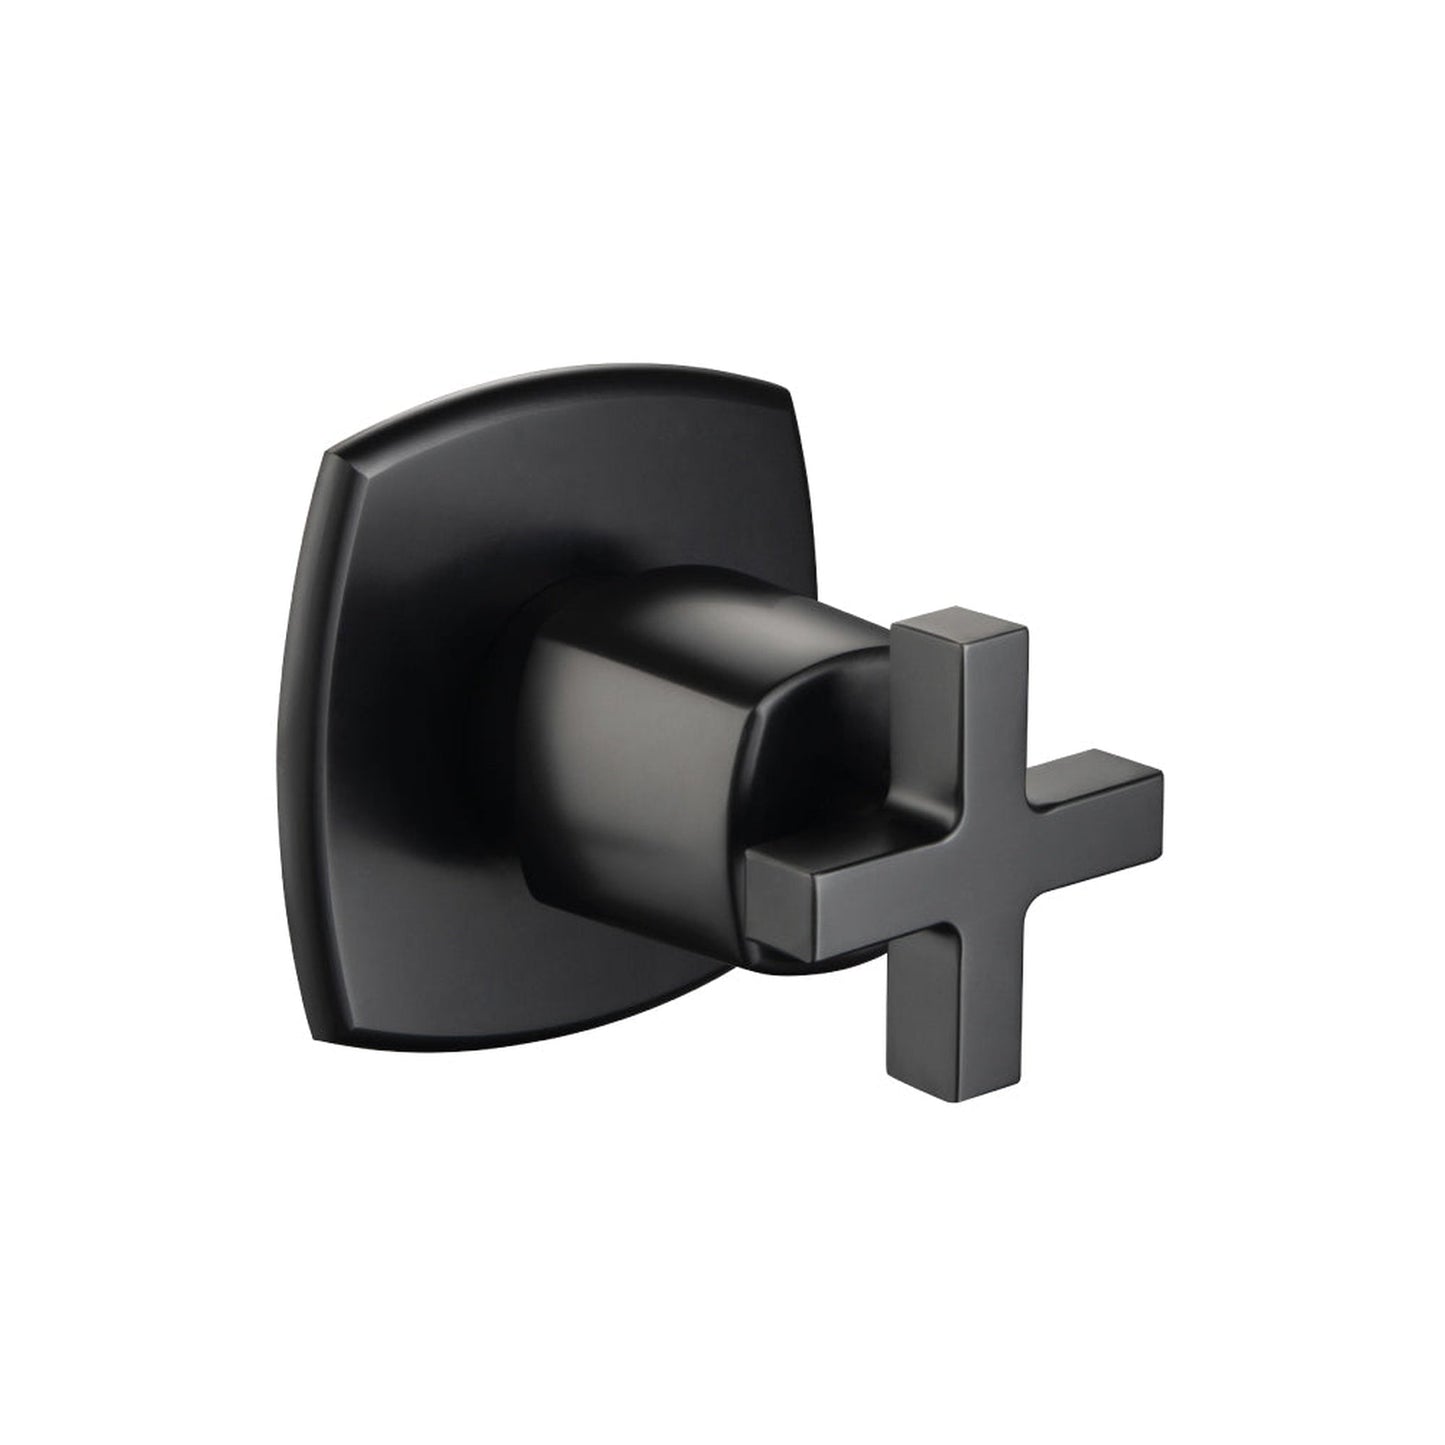 Isenberg Serie 240 3" Matte Black Wall Mounted Shower Faucet Trim With 0.75" Single-Output NPT Female Connection Volume Control Valve